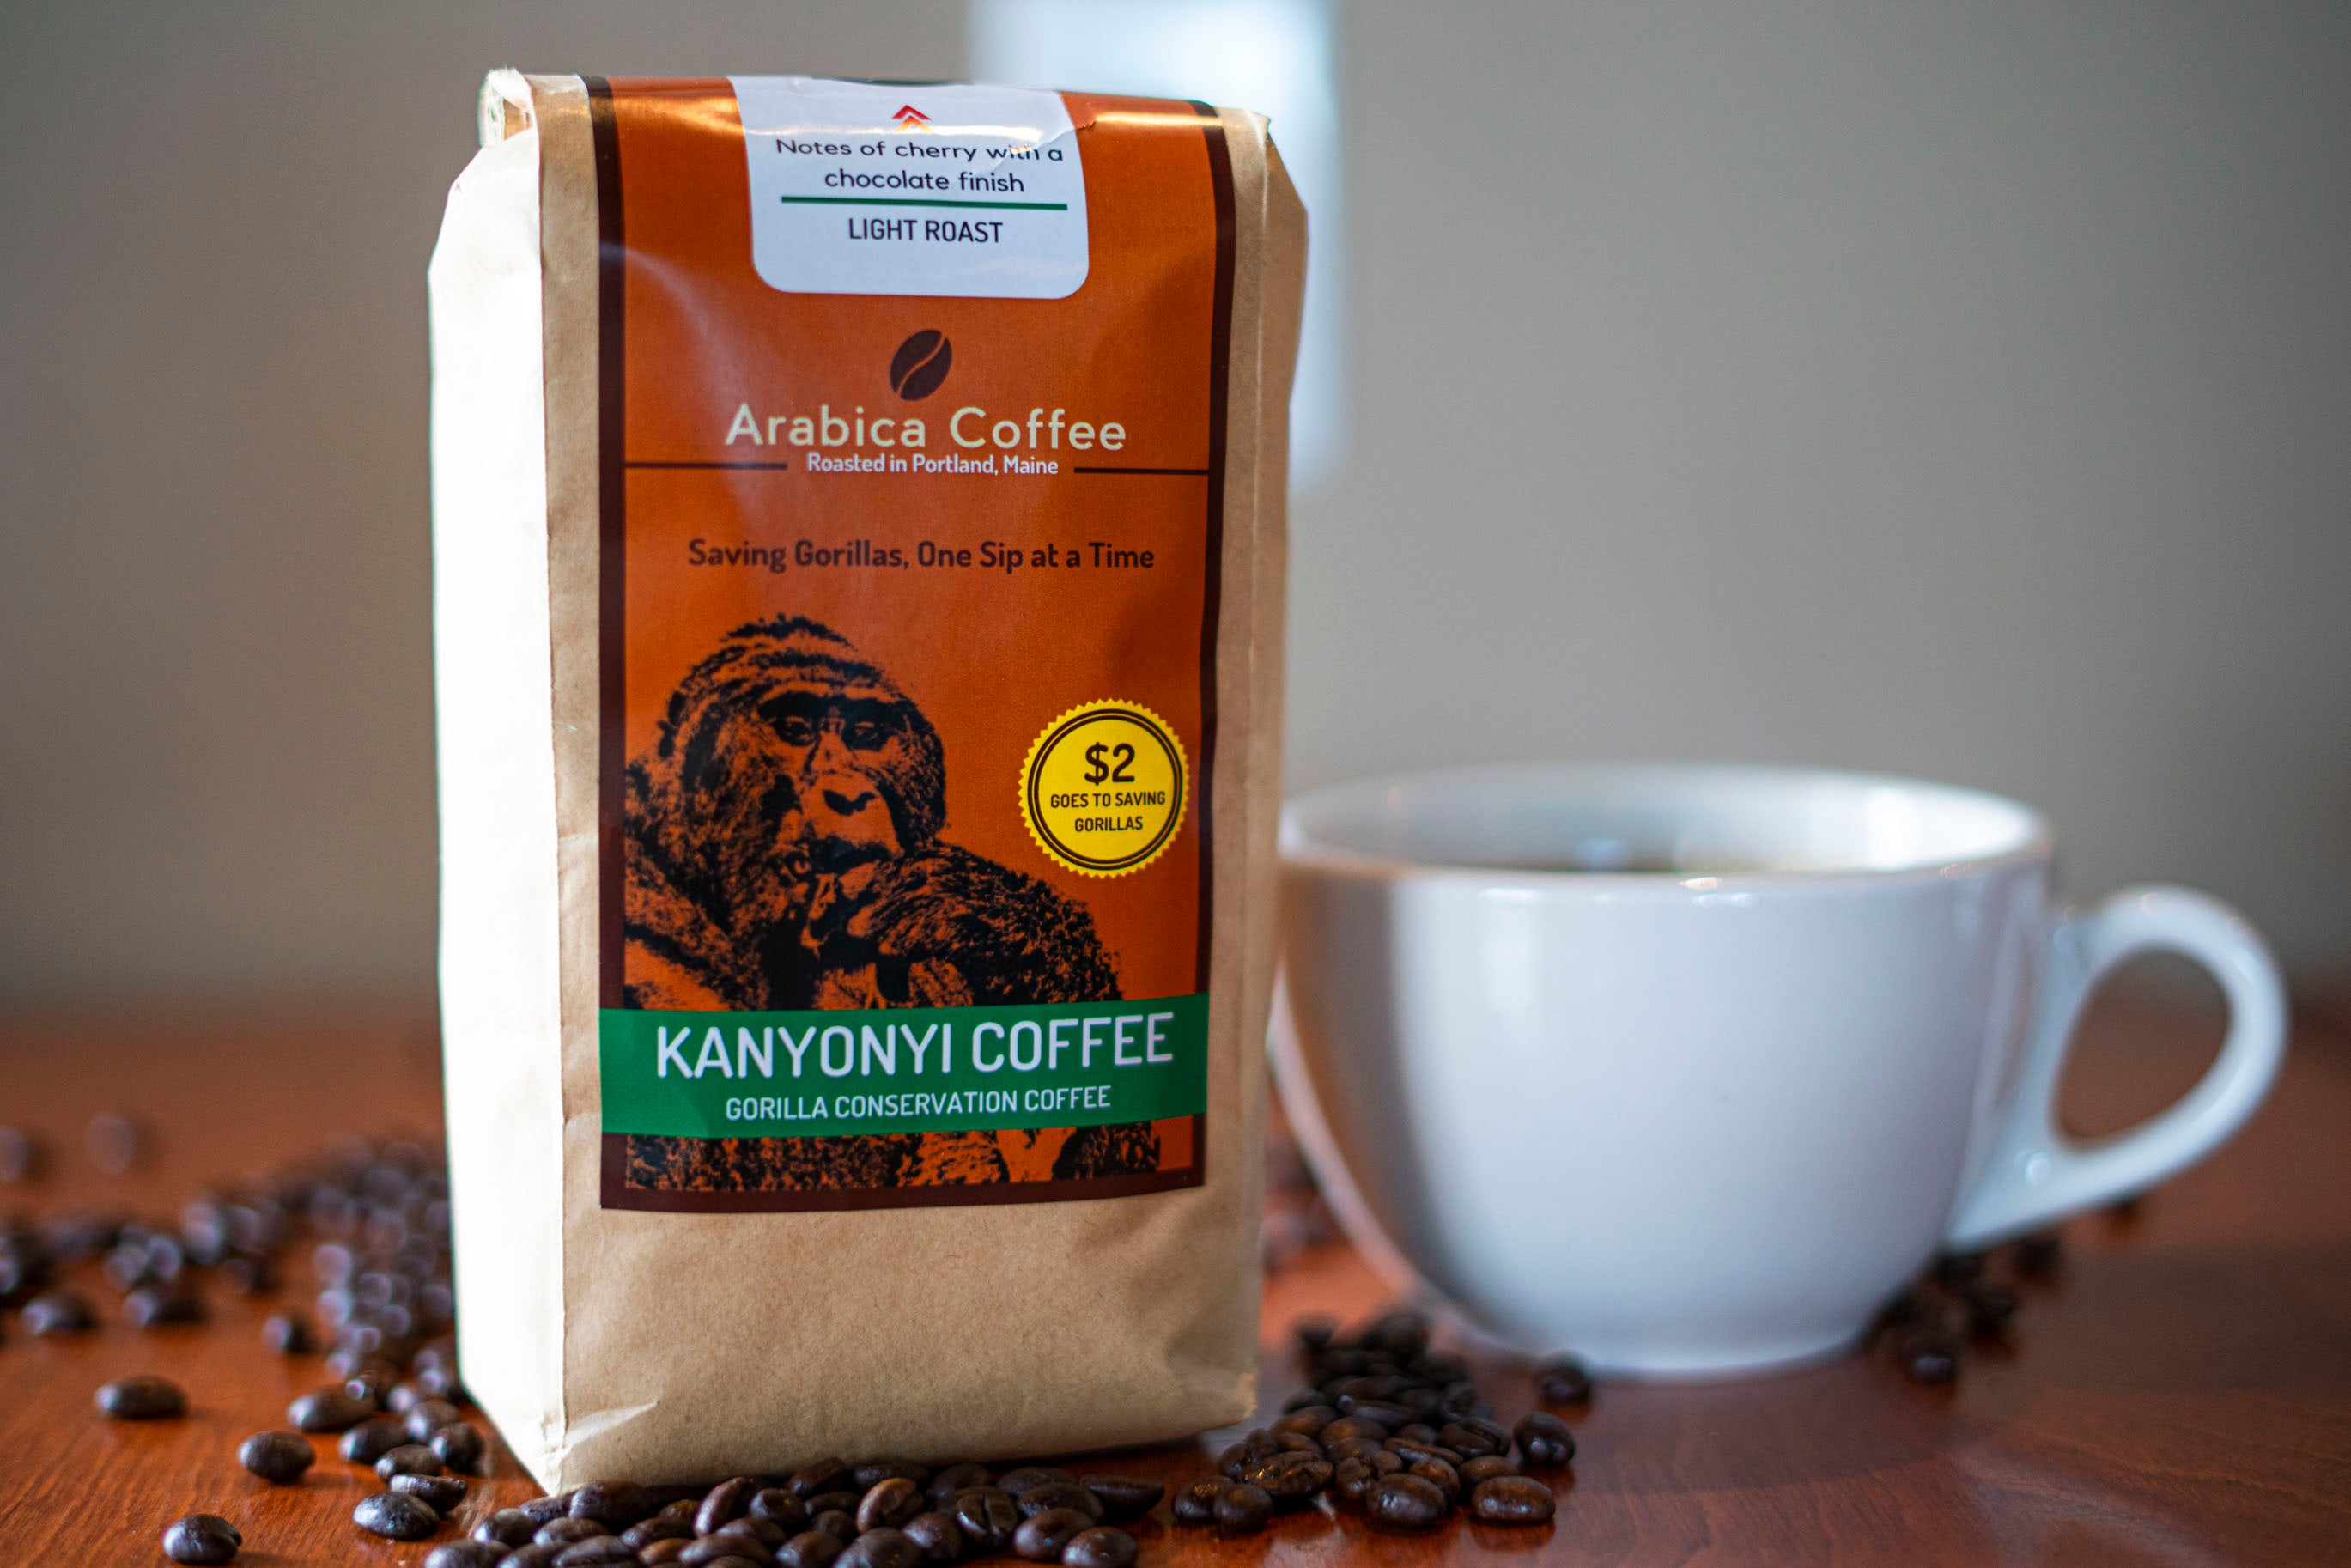 How is Gorilla Conservation Coffee changing lives in Uganda?